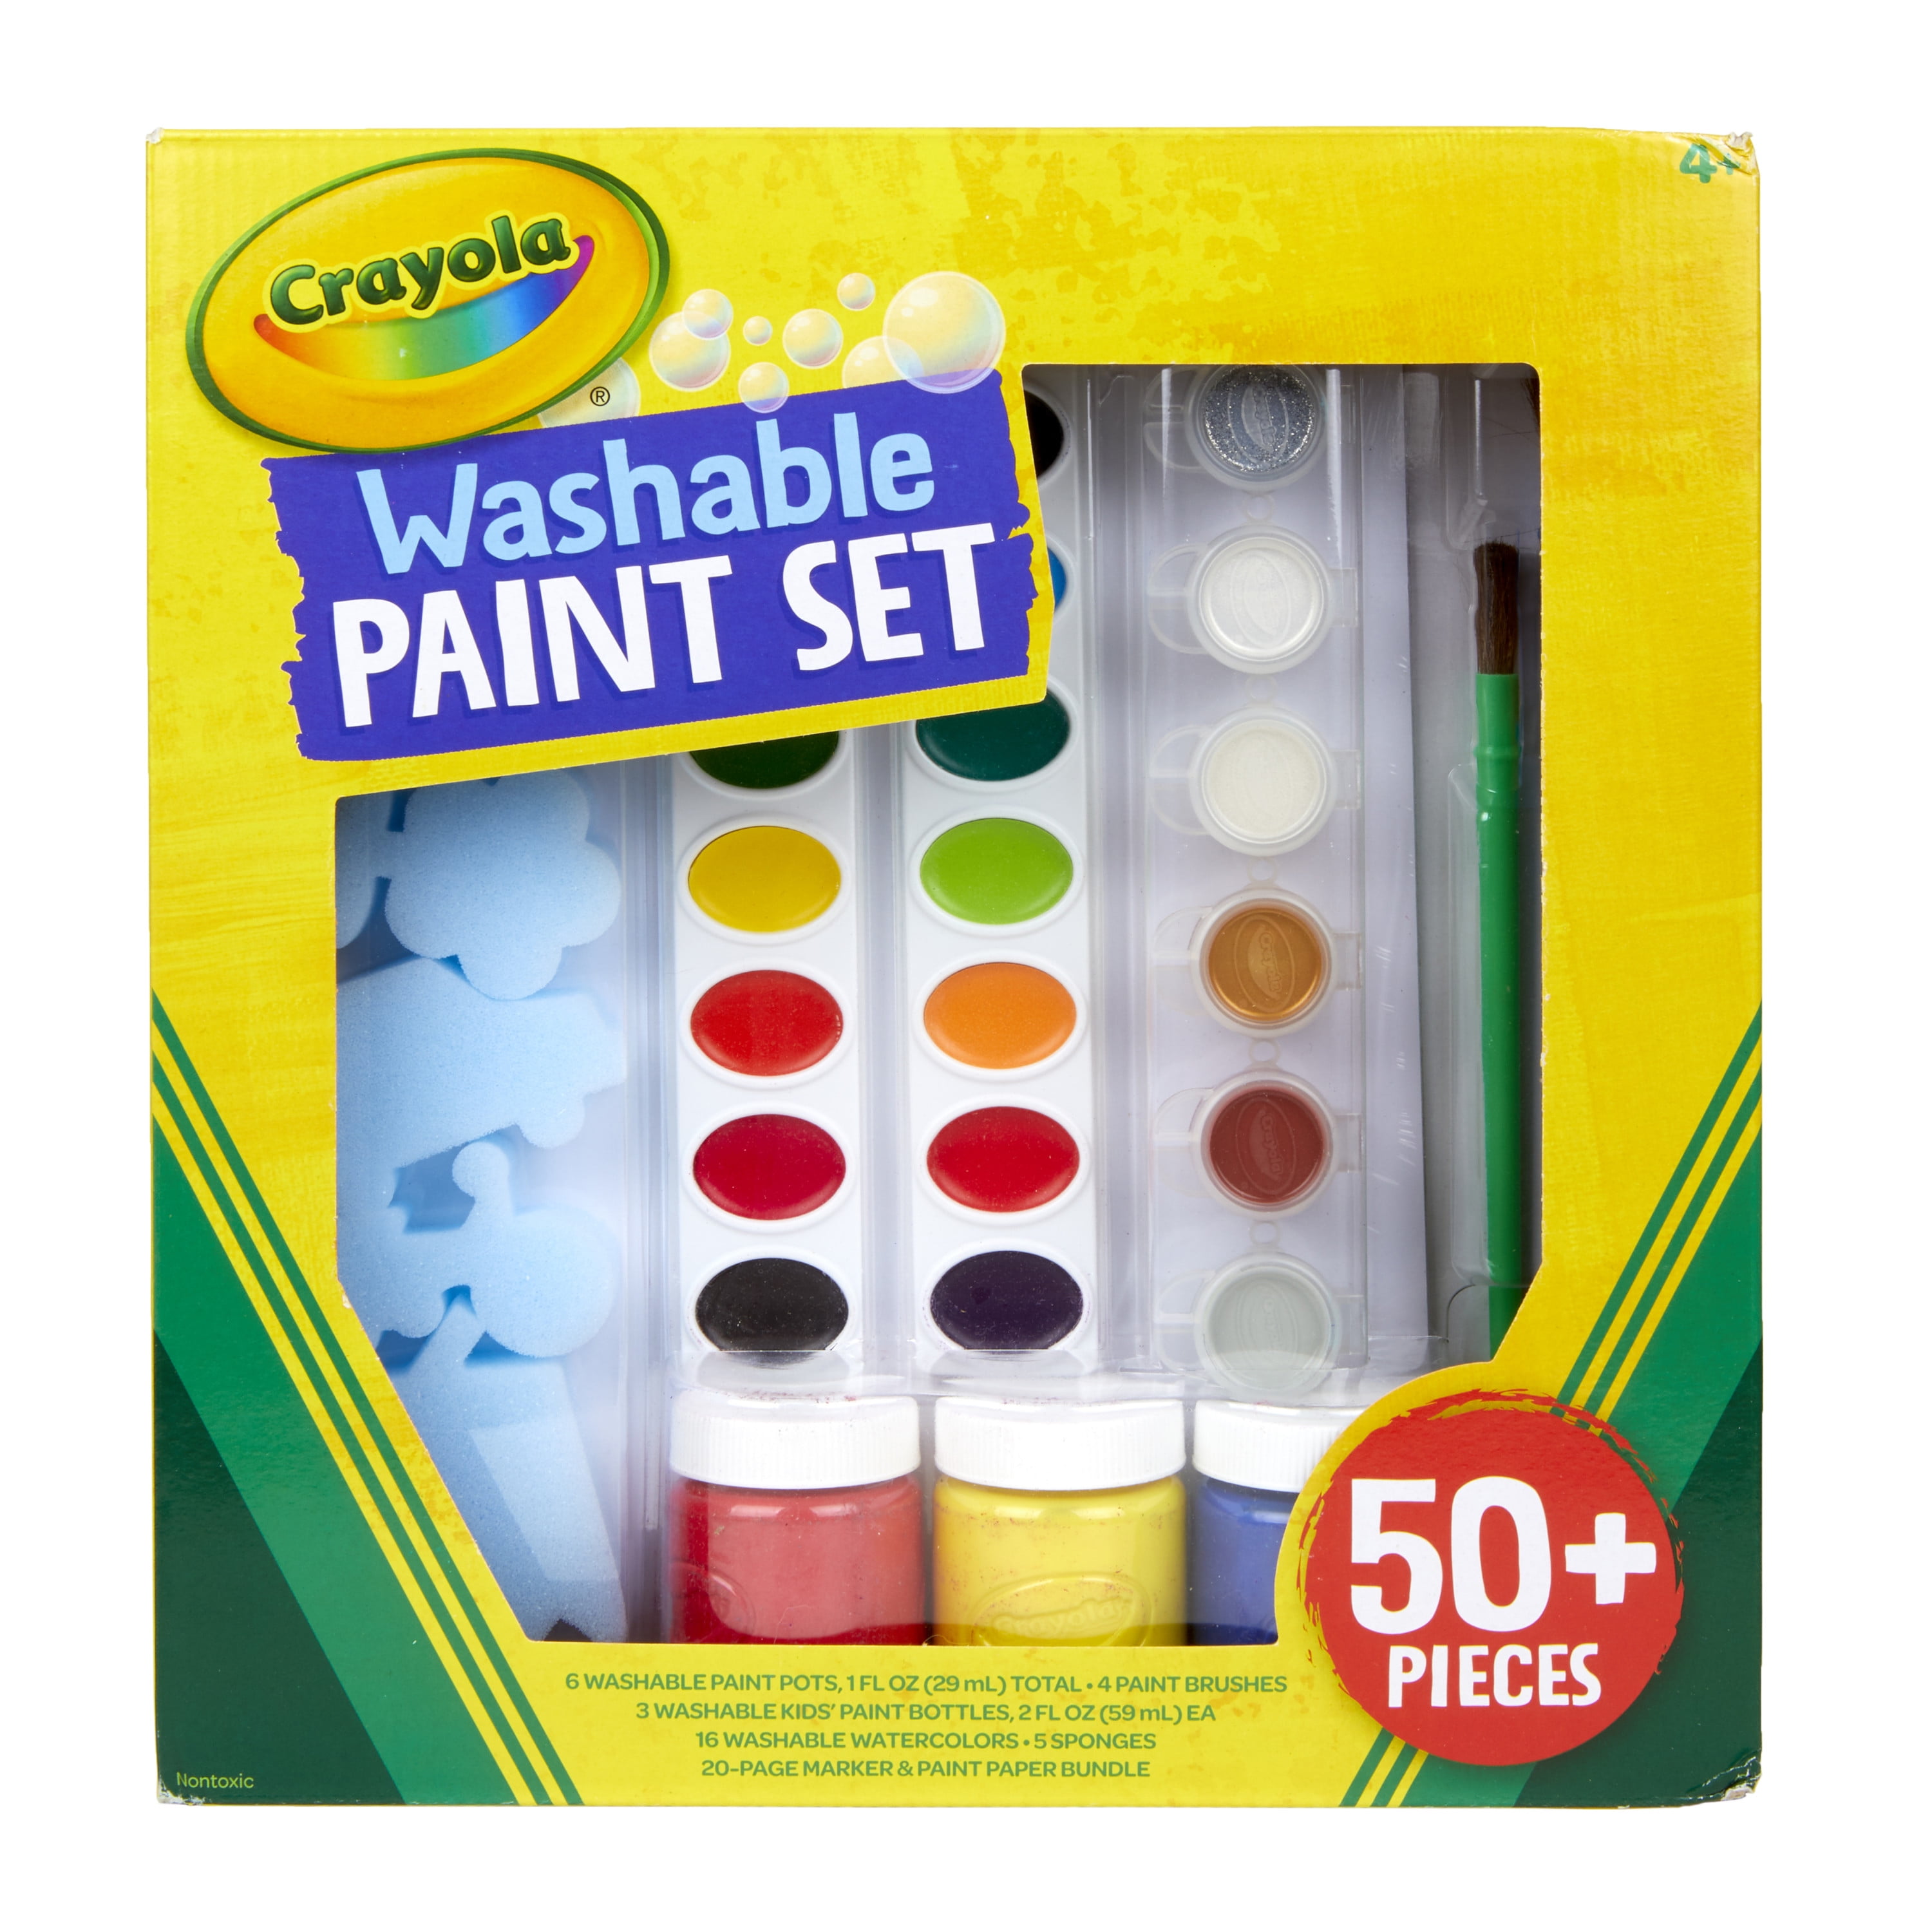 US Art Supply 18 Color Children's Washable Tempera Paint Set - 2 Ounce Wide  Mouth Bottles for Arts, Crafts and Posters